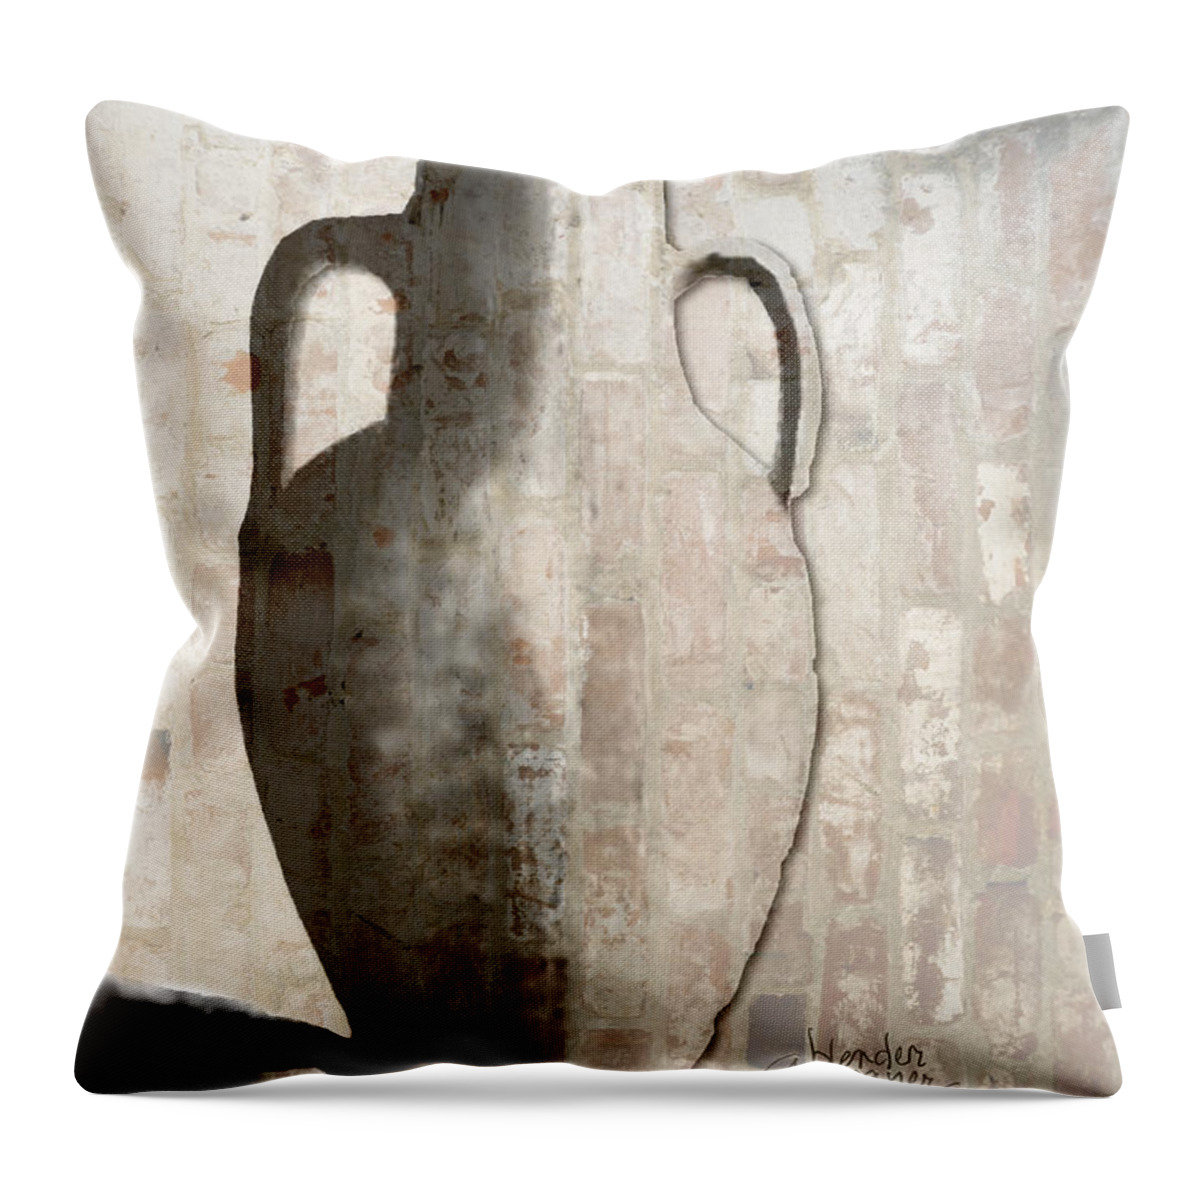 Urn Throw Pillow featuring the digital art Urn by Arline Wagner